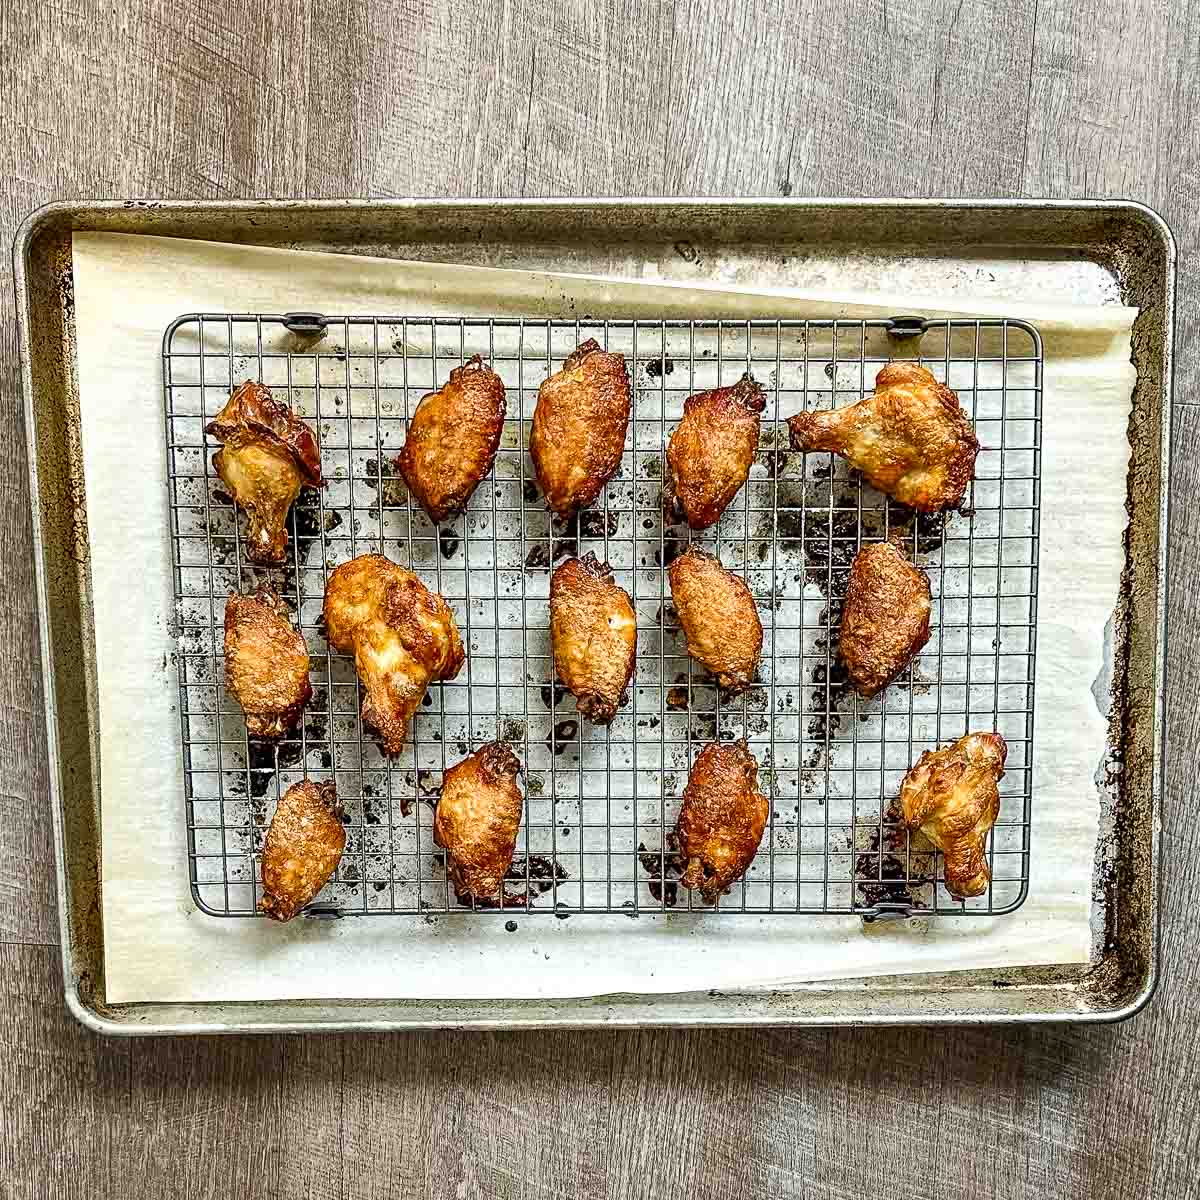 Baked soy garlic wings on a sheet tray.